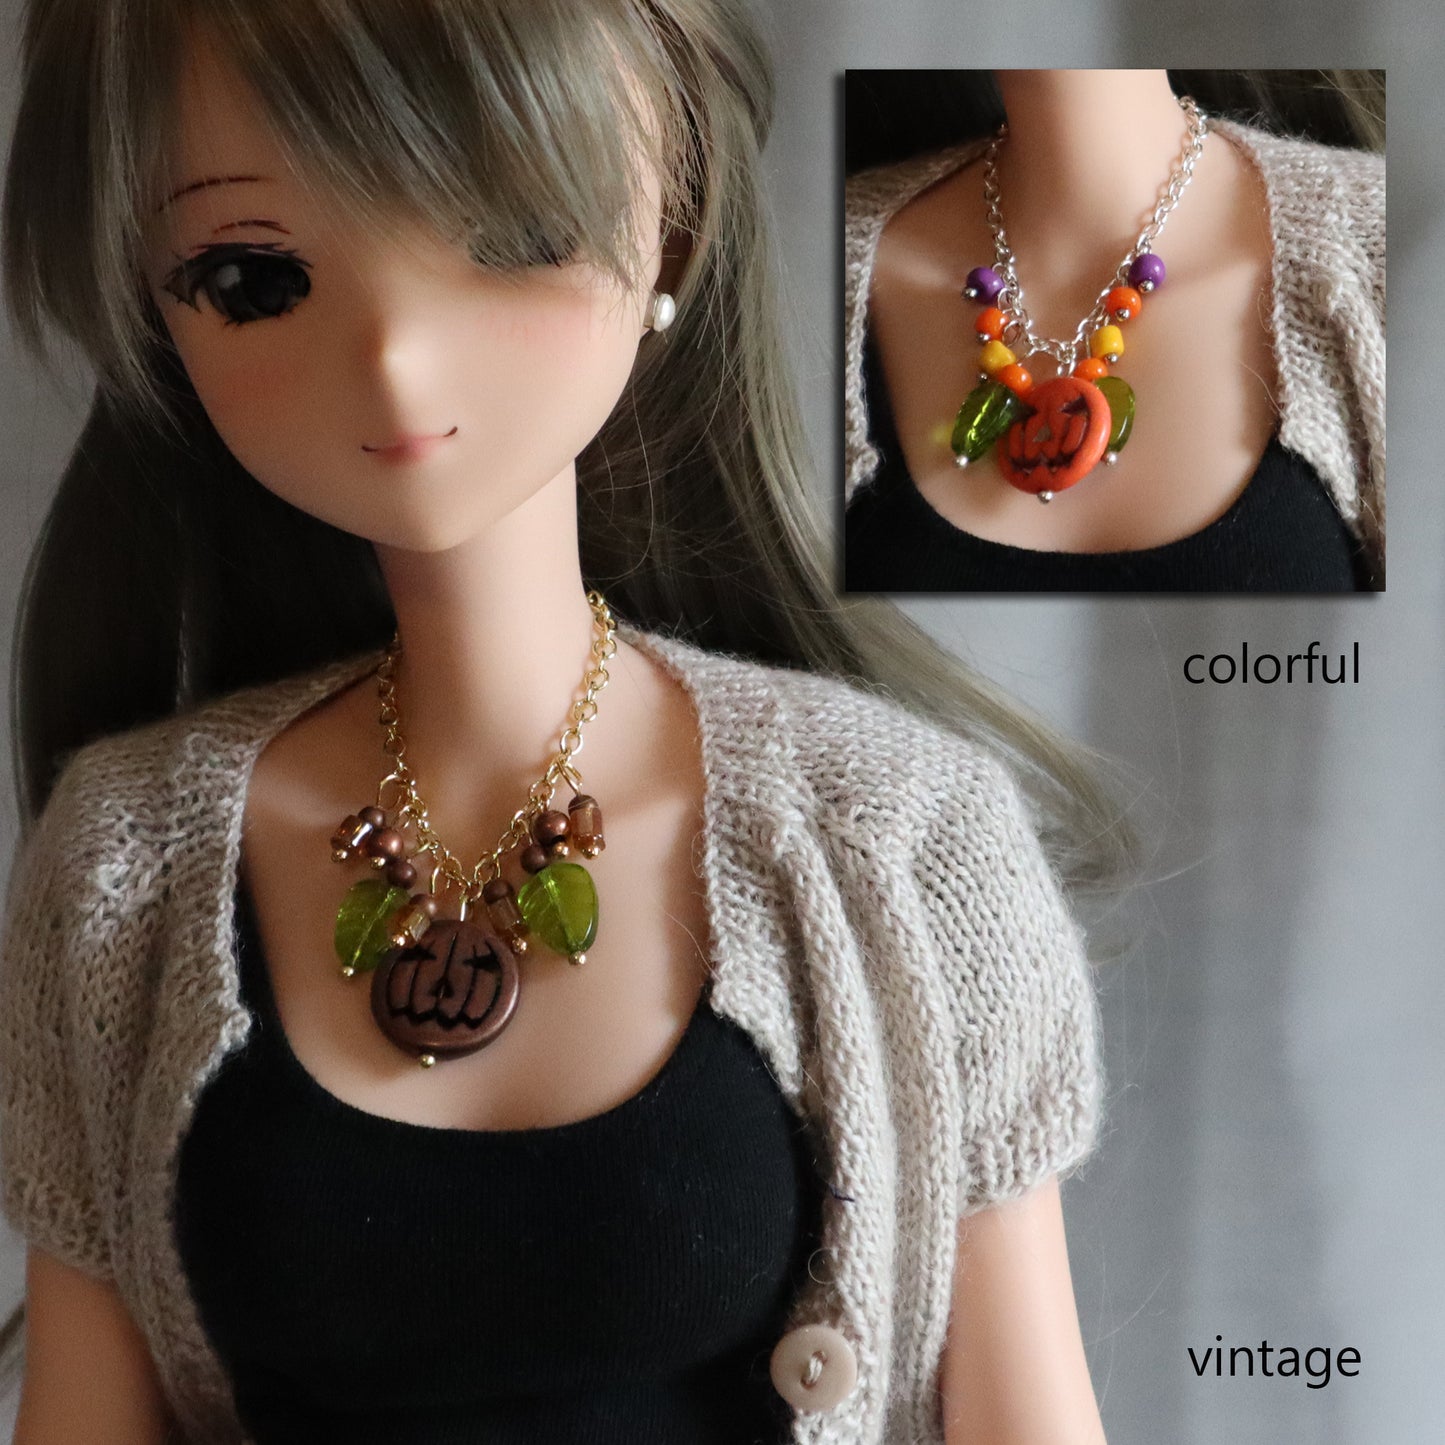 Magnetic Clasp Necklace for BJD - Pumpkin Patch (2 styles)